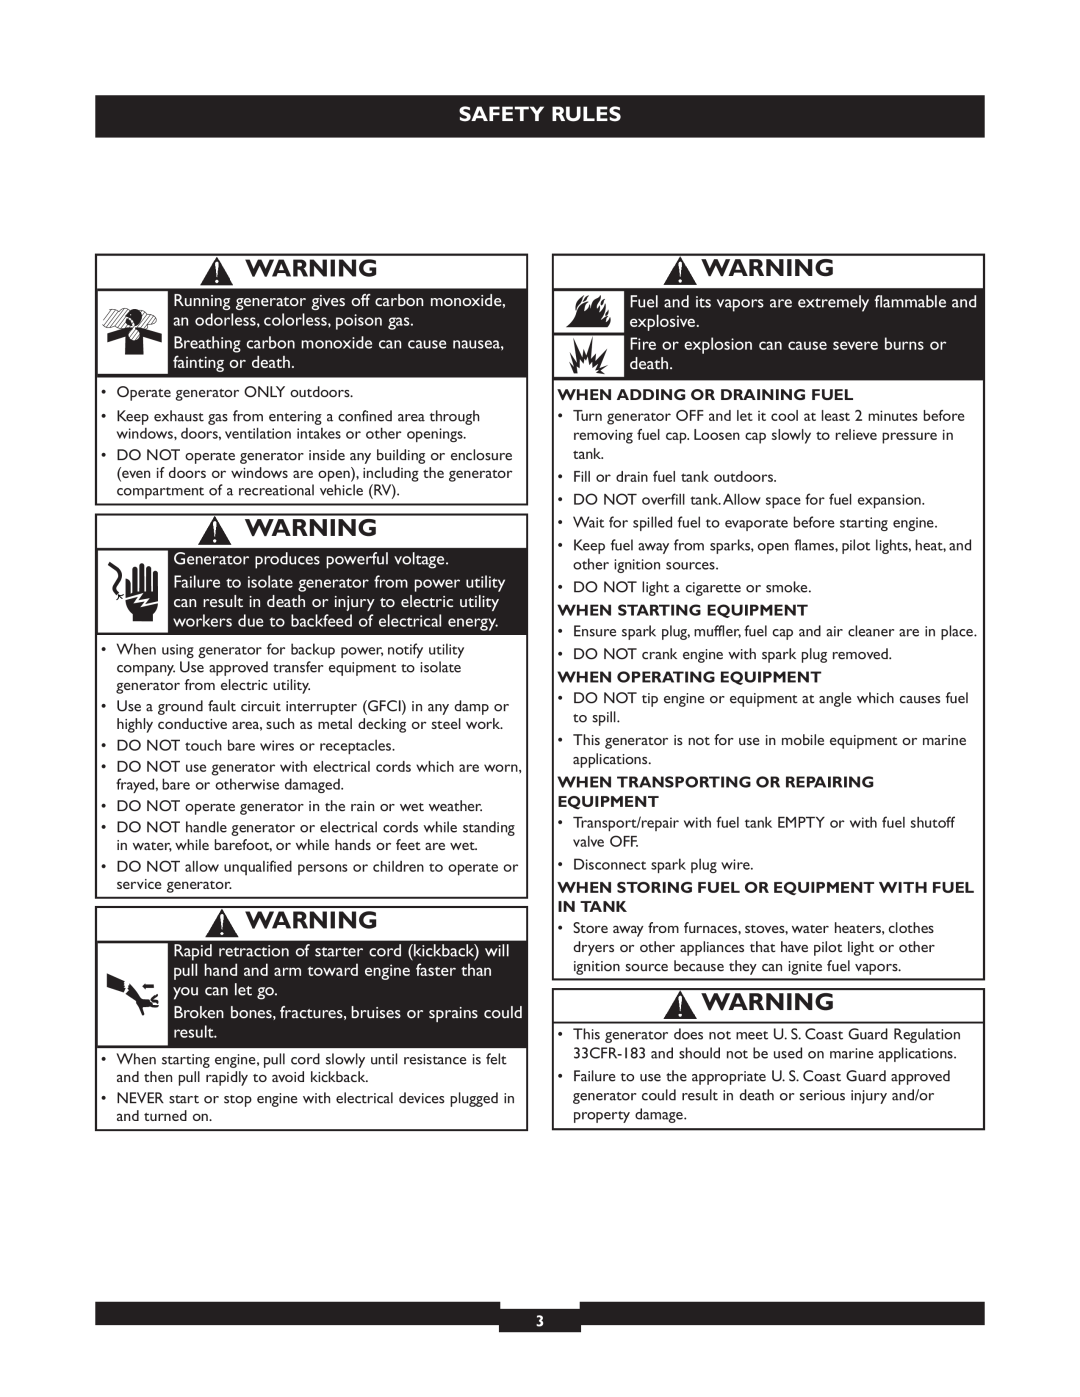 Briggs & Stratton 30219 manual Safety Rules, Breathing carbon monoxide can cause nausea, fainting or death 